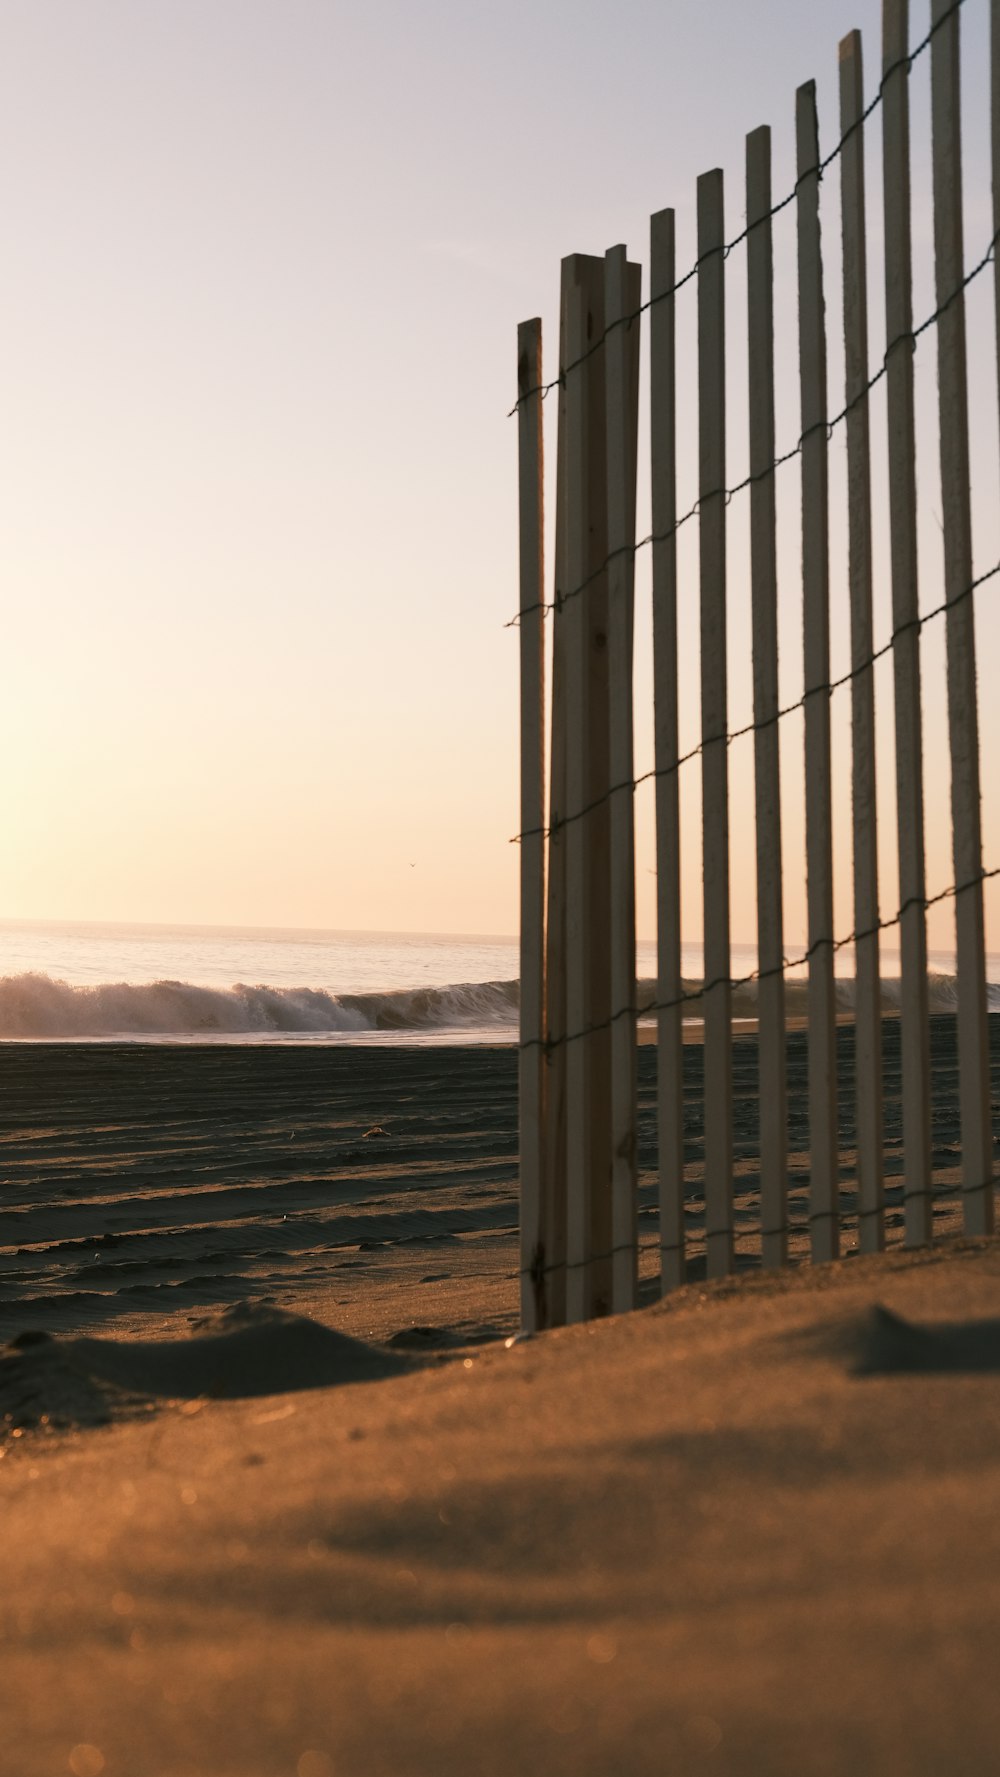 a fence on a beach with a body of water in the background